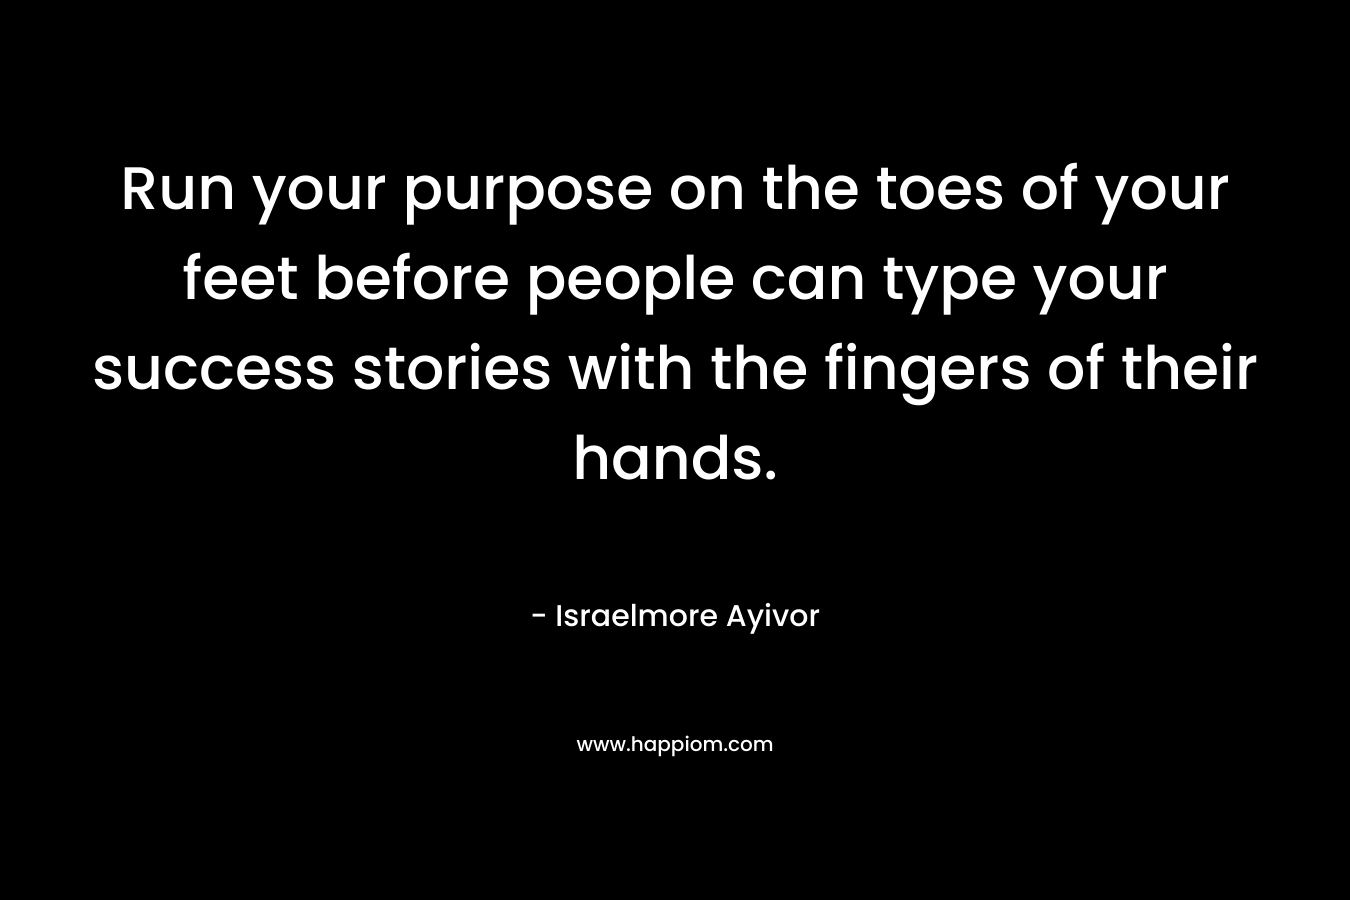 Run your purpose on the toes of your feet before people can type your success stories with the fingers of their hands.